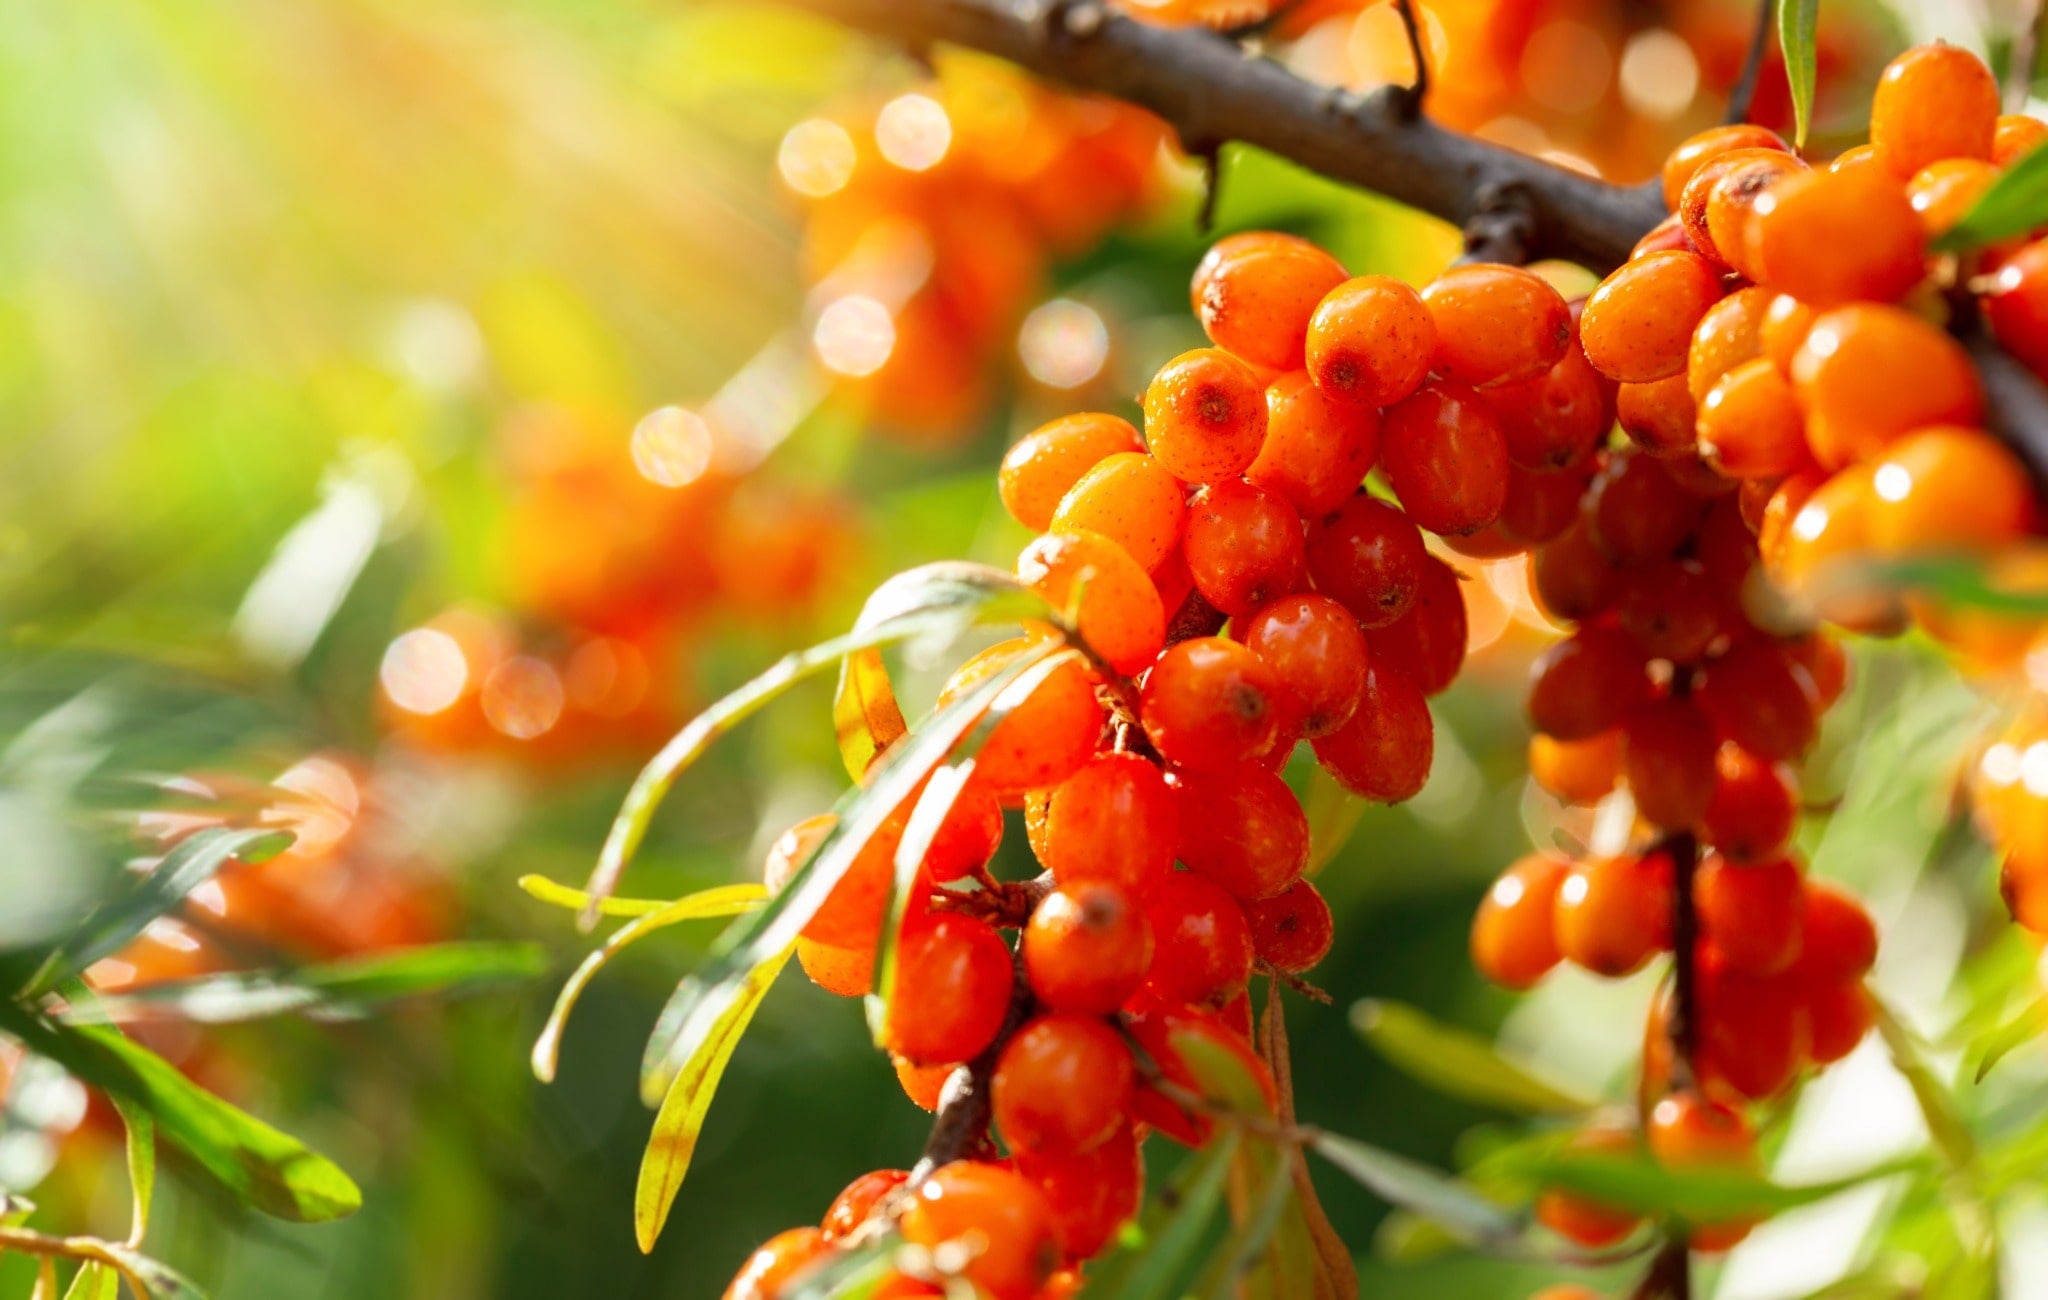 Close-up of vibrant orange sea buckthorn berries on a branch with green leaves in the background.